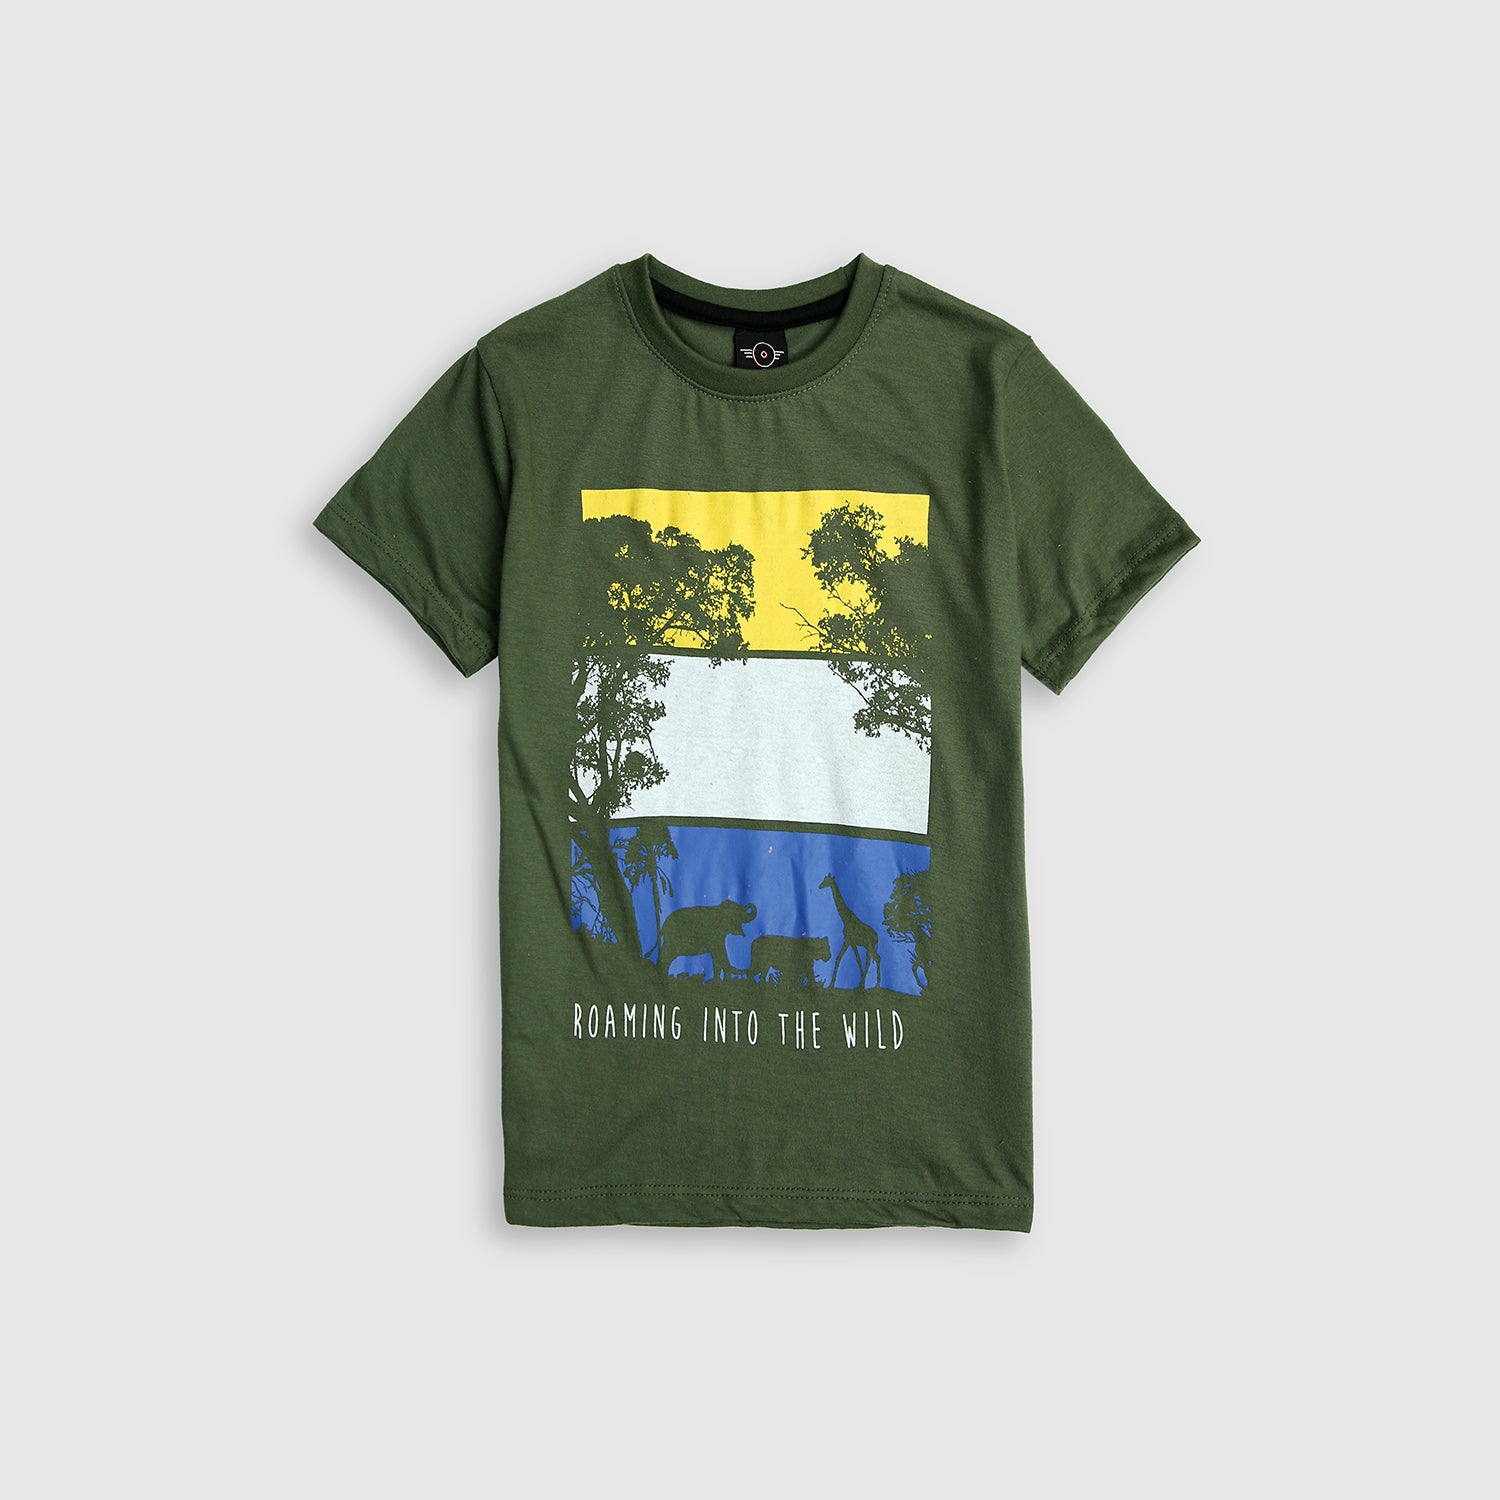 Boys Pure Cotton "Roaming into the wild" Graphic T-Shirt